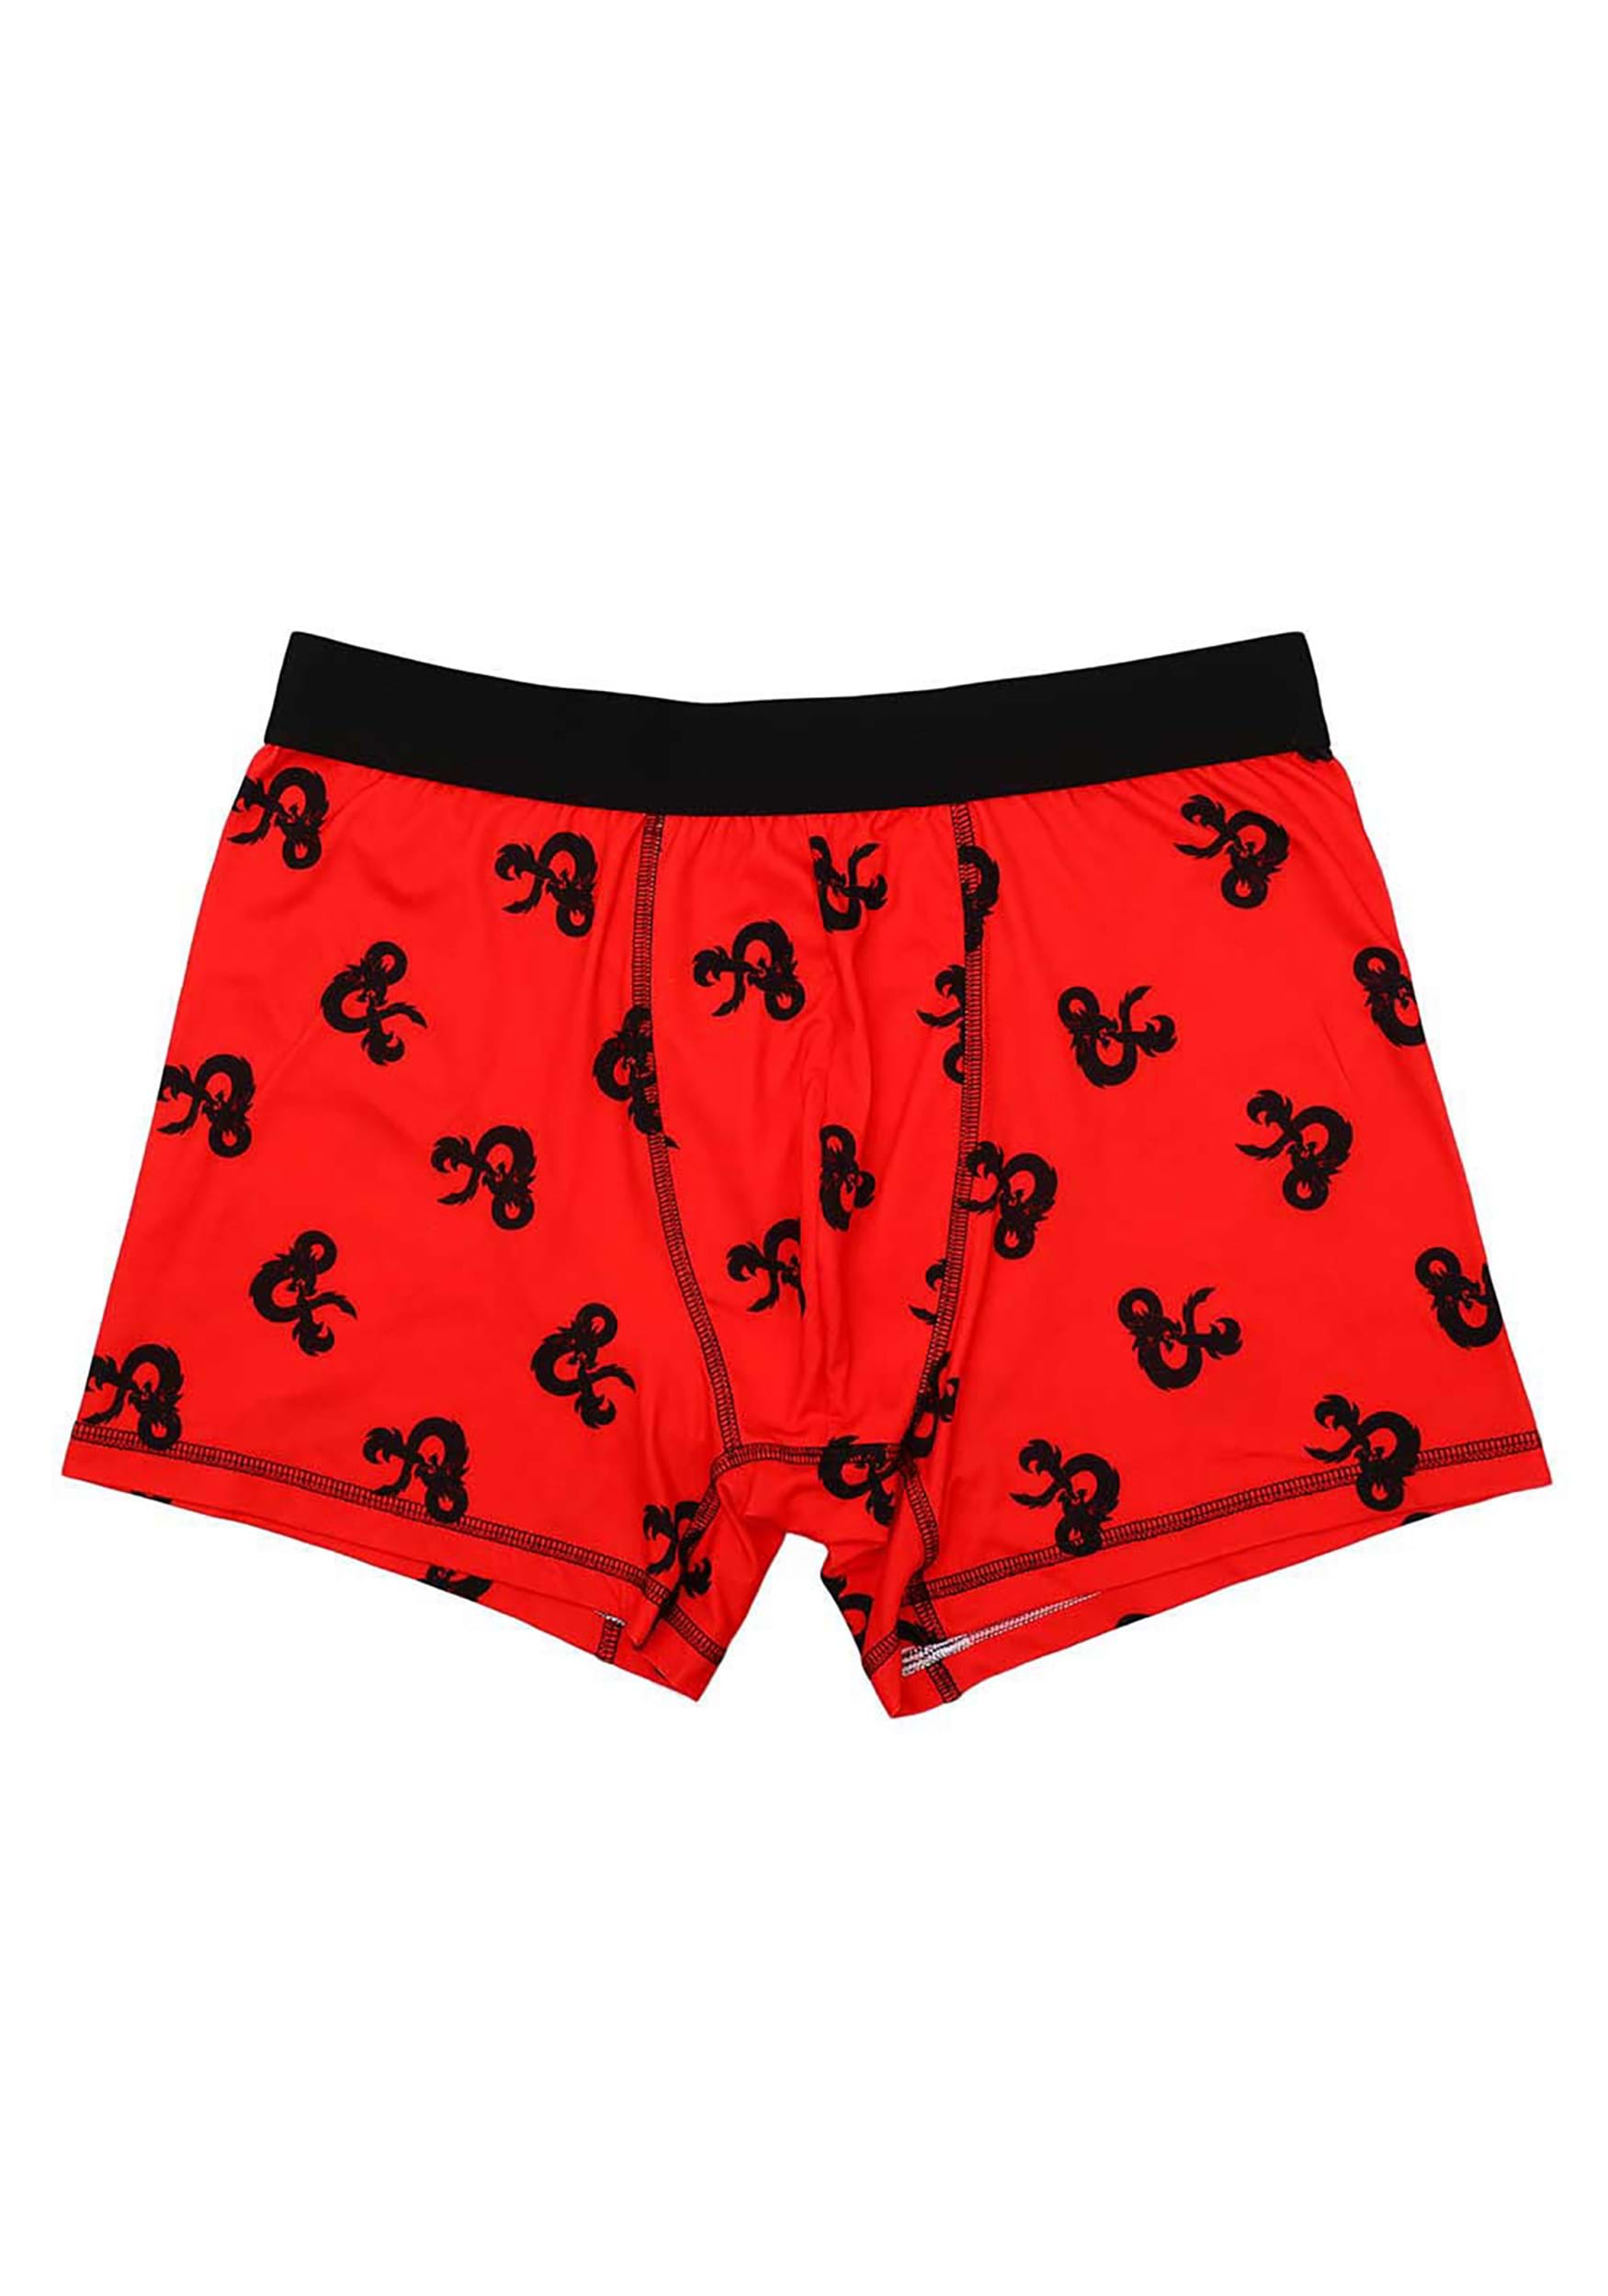  Odd Sox, Naruto Merchandise, Men's Underwear Boxer Briefs,  Funny Prints, Small: Clothing, Shoes & Jewelry